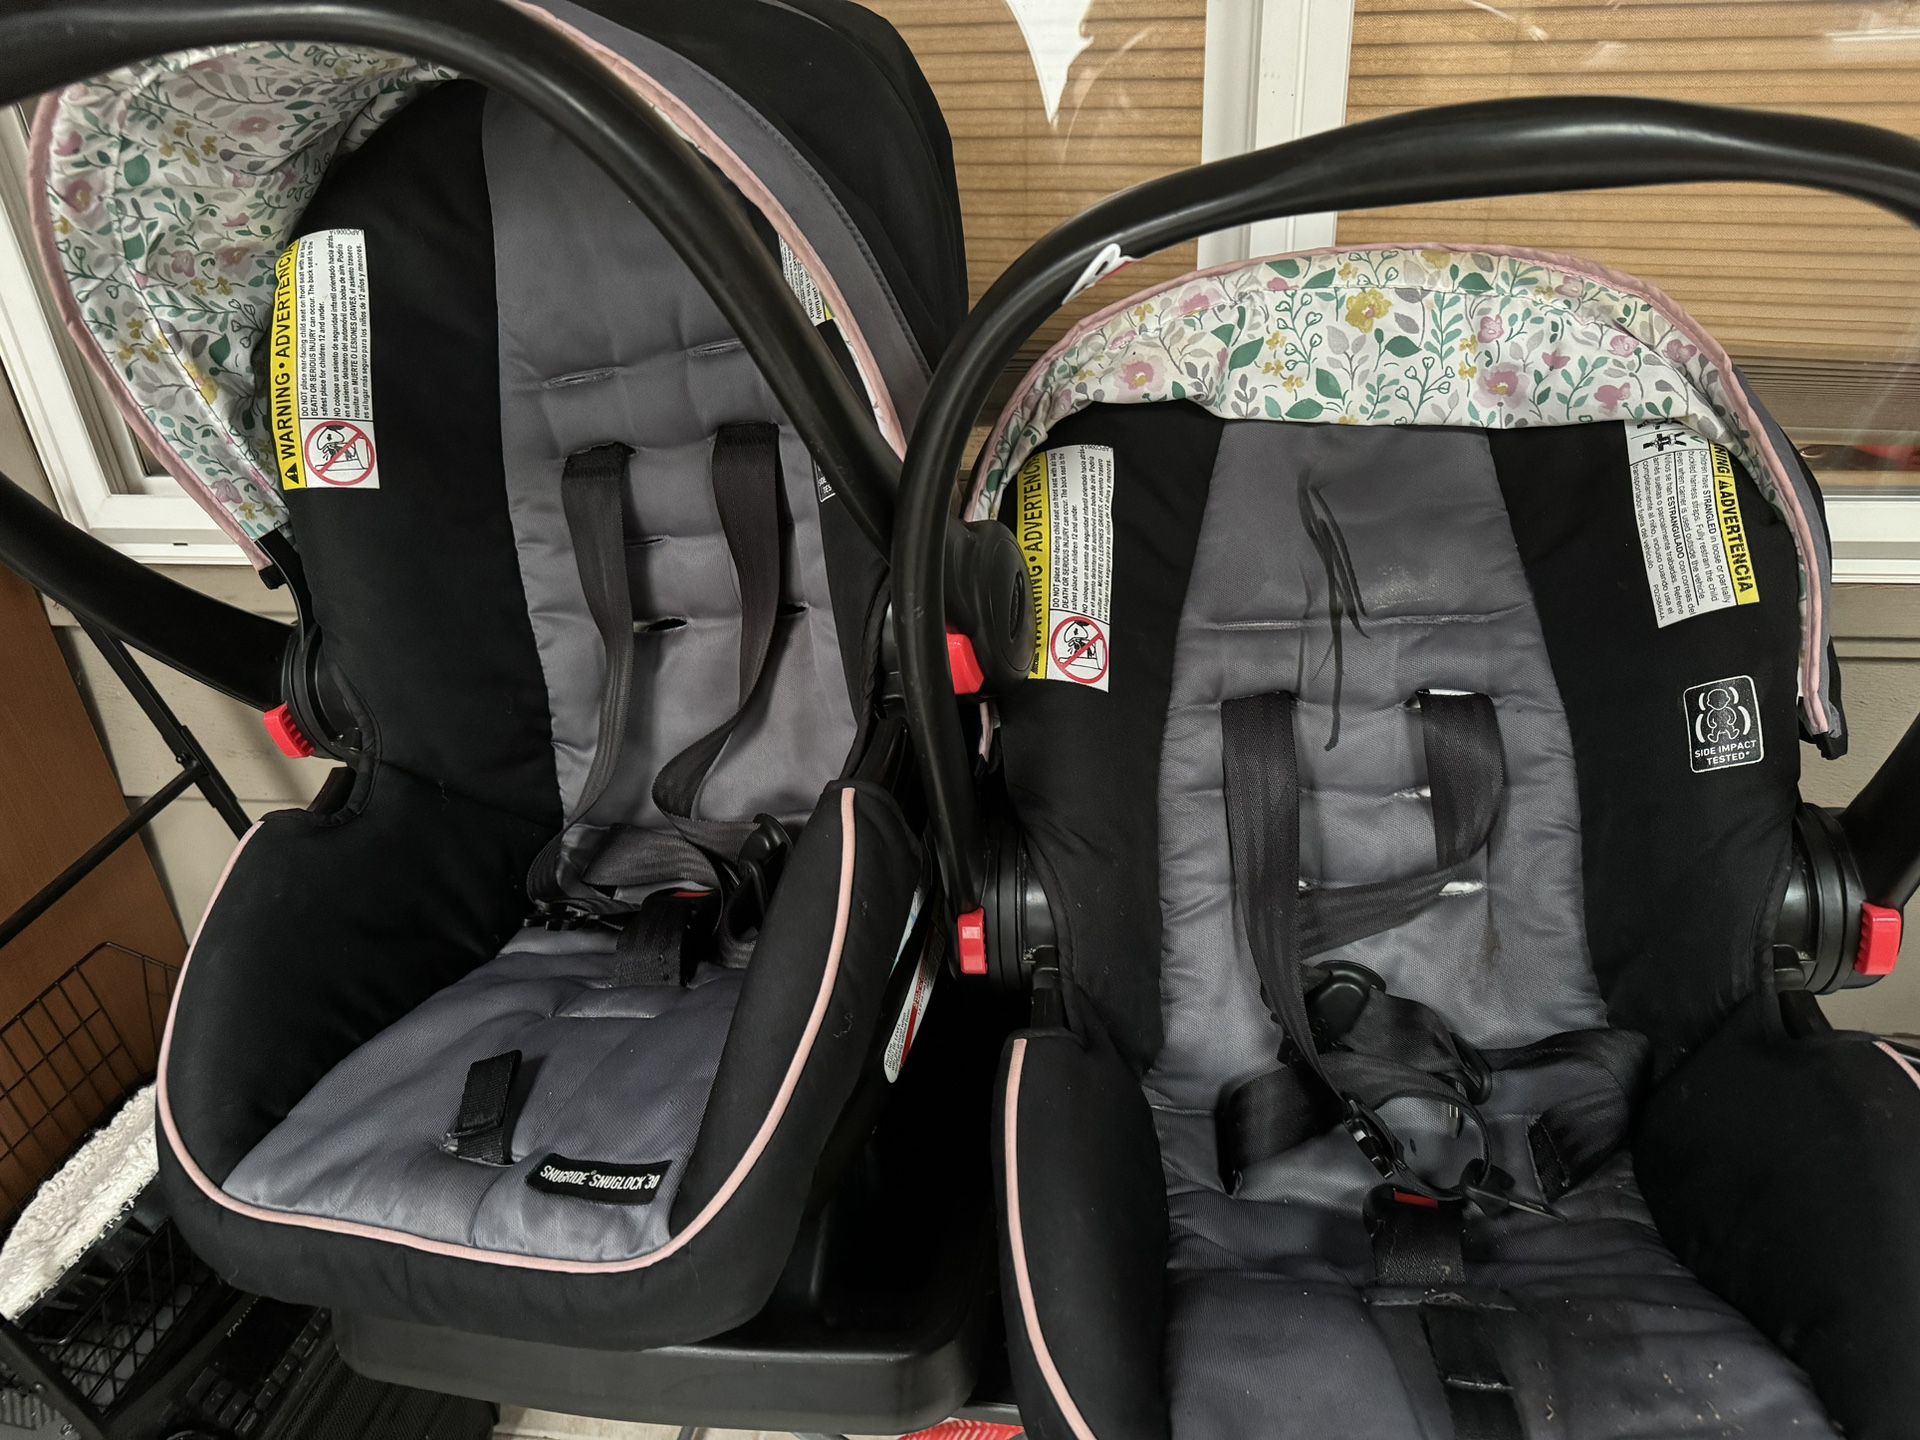 2 infant car Seats And misc clothes